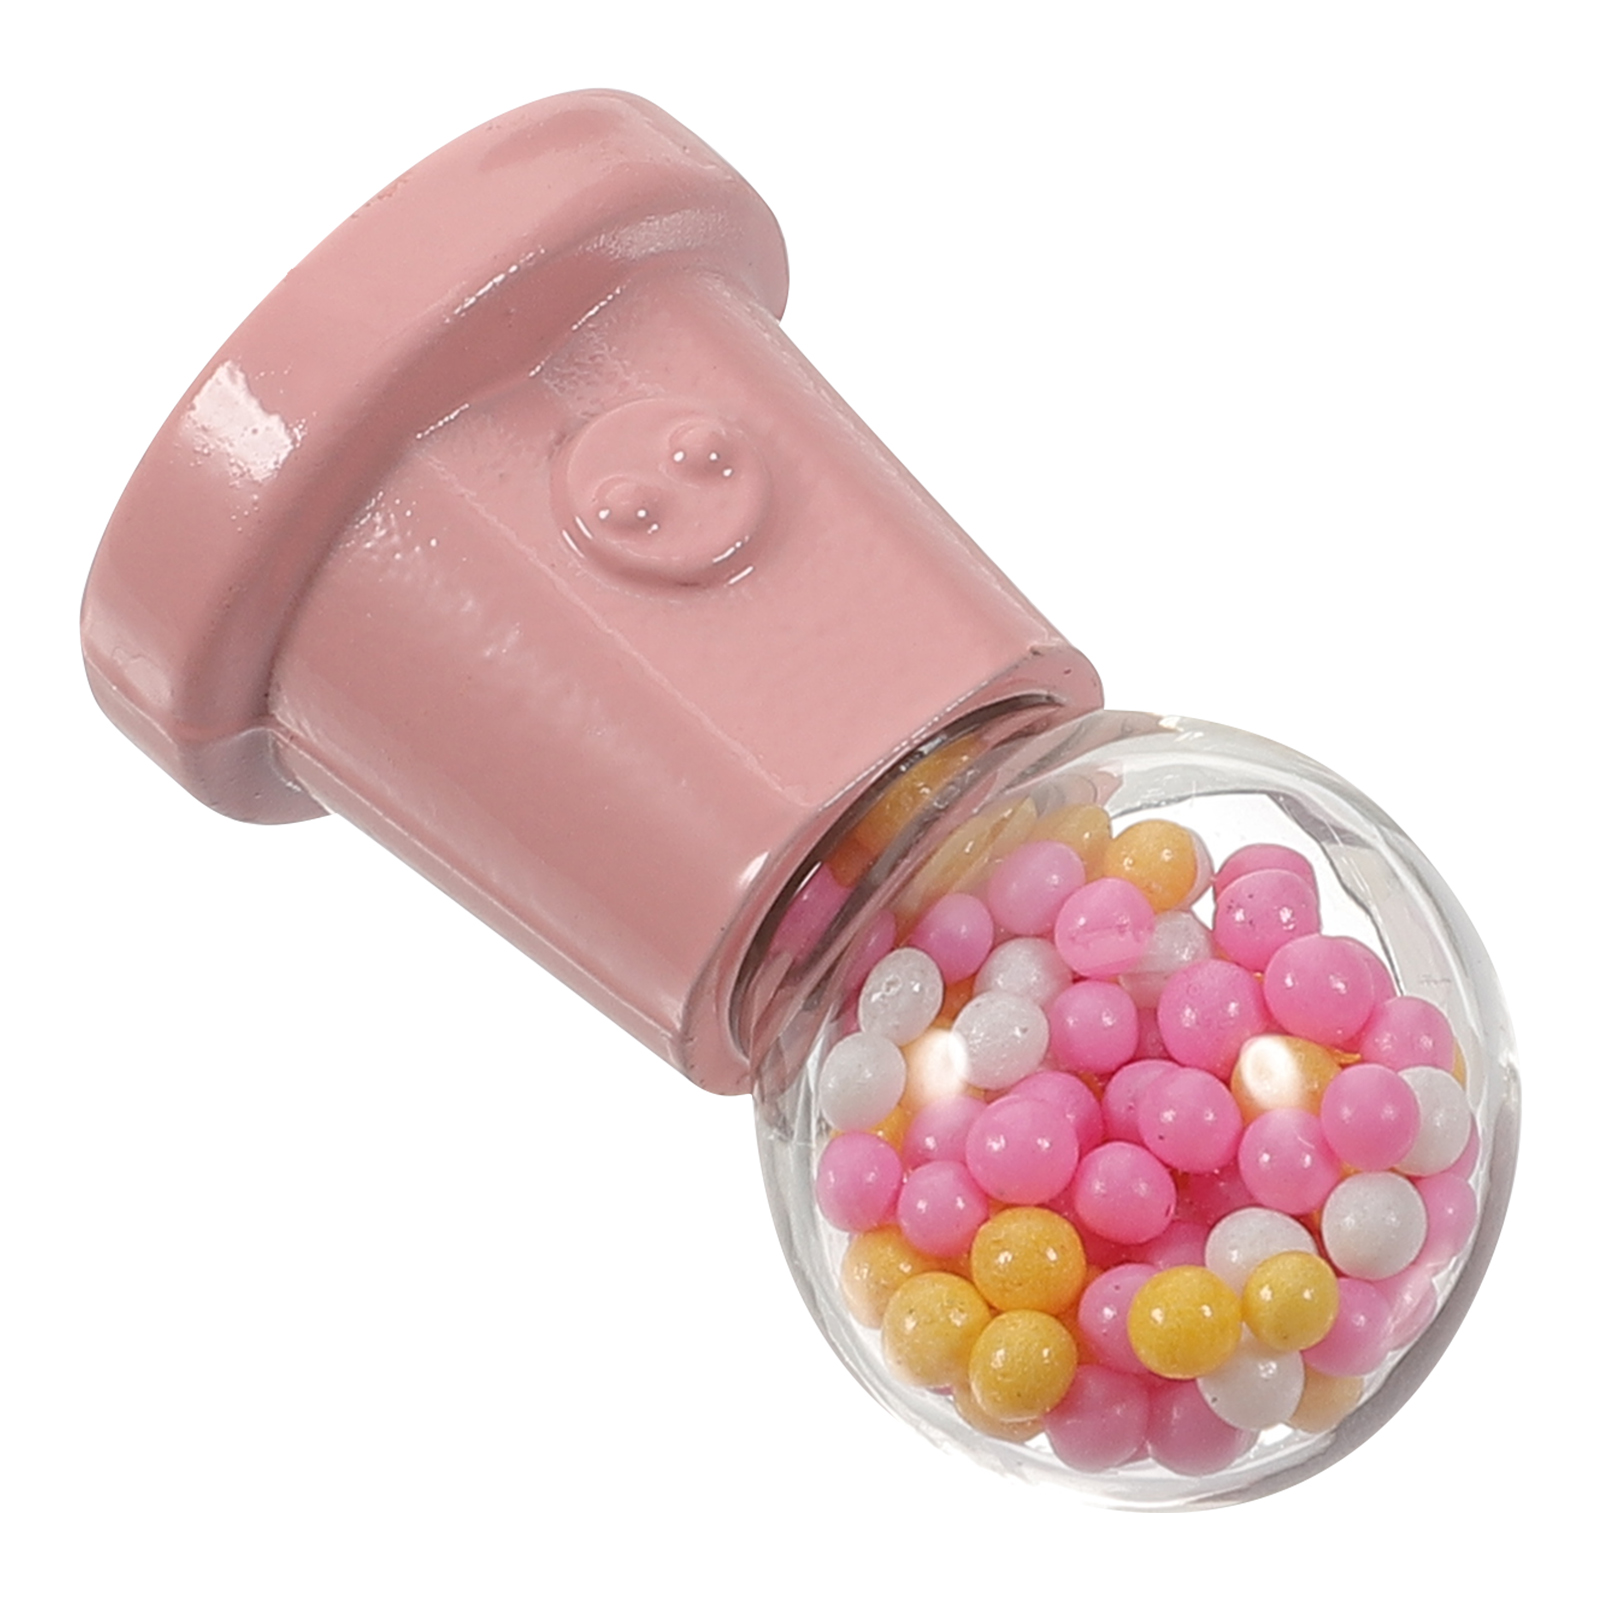 Set of 2 Mini Candy Machine Miniature Toys Accessories Doll House Furniture Gumball Twisters Dispenser Child - image 2 of 6